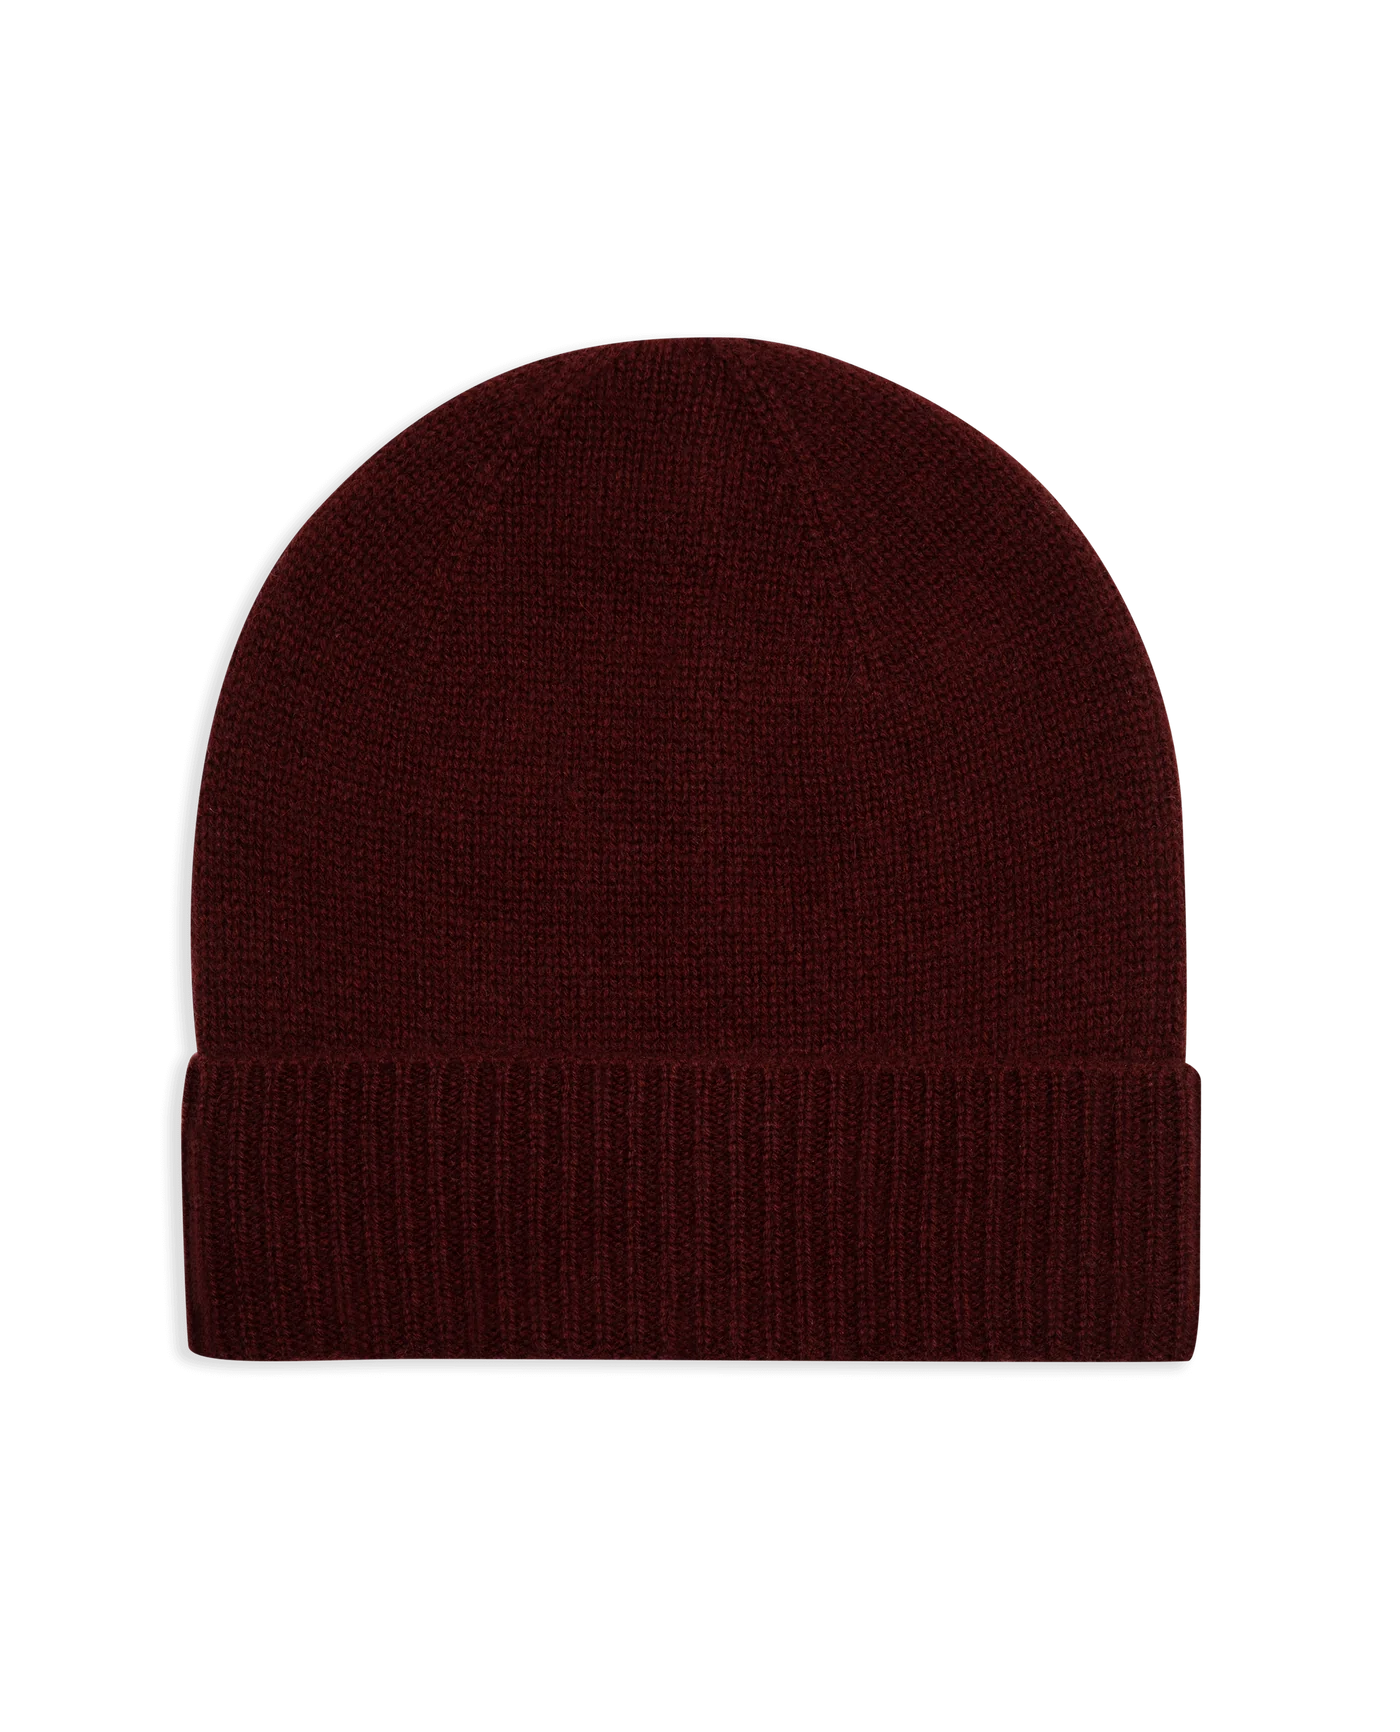 Rise And Fall + Finest Cashmere Beanie in Burgundy